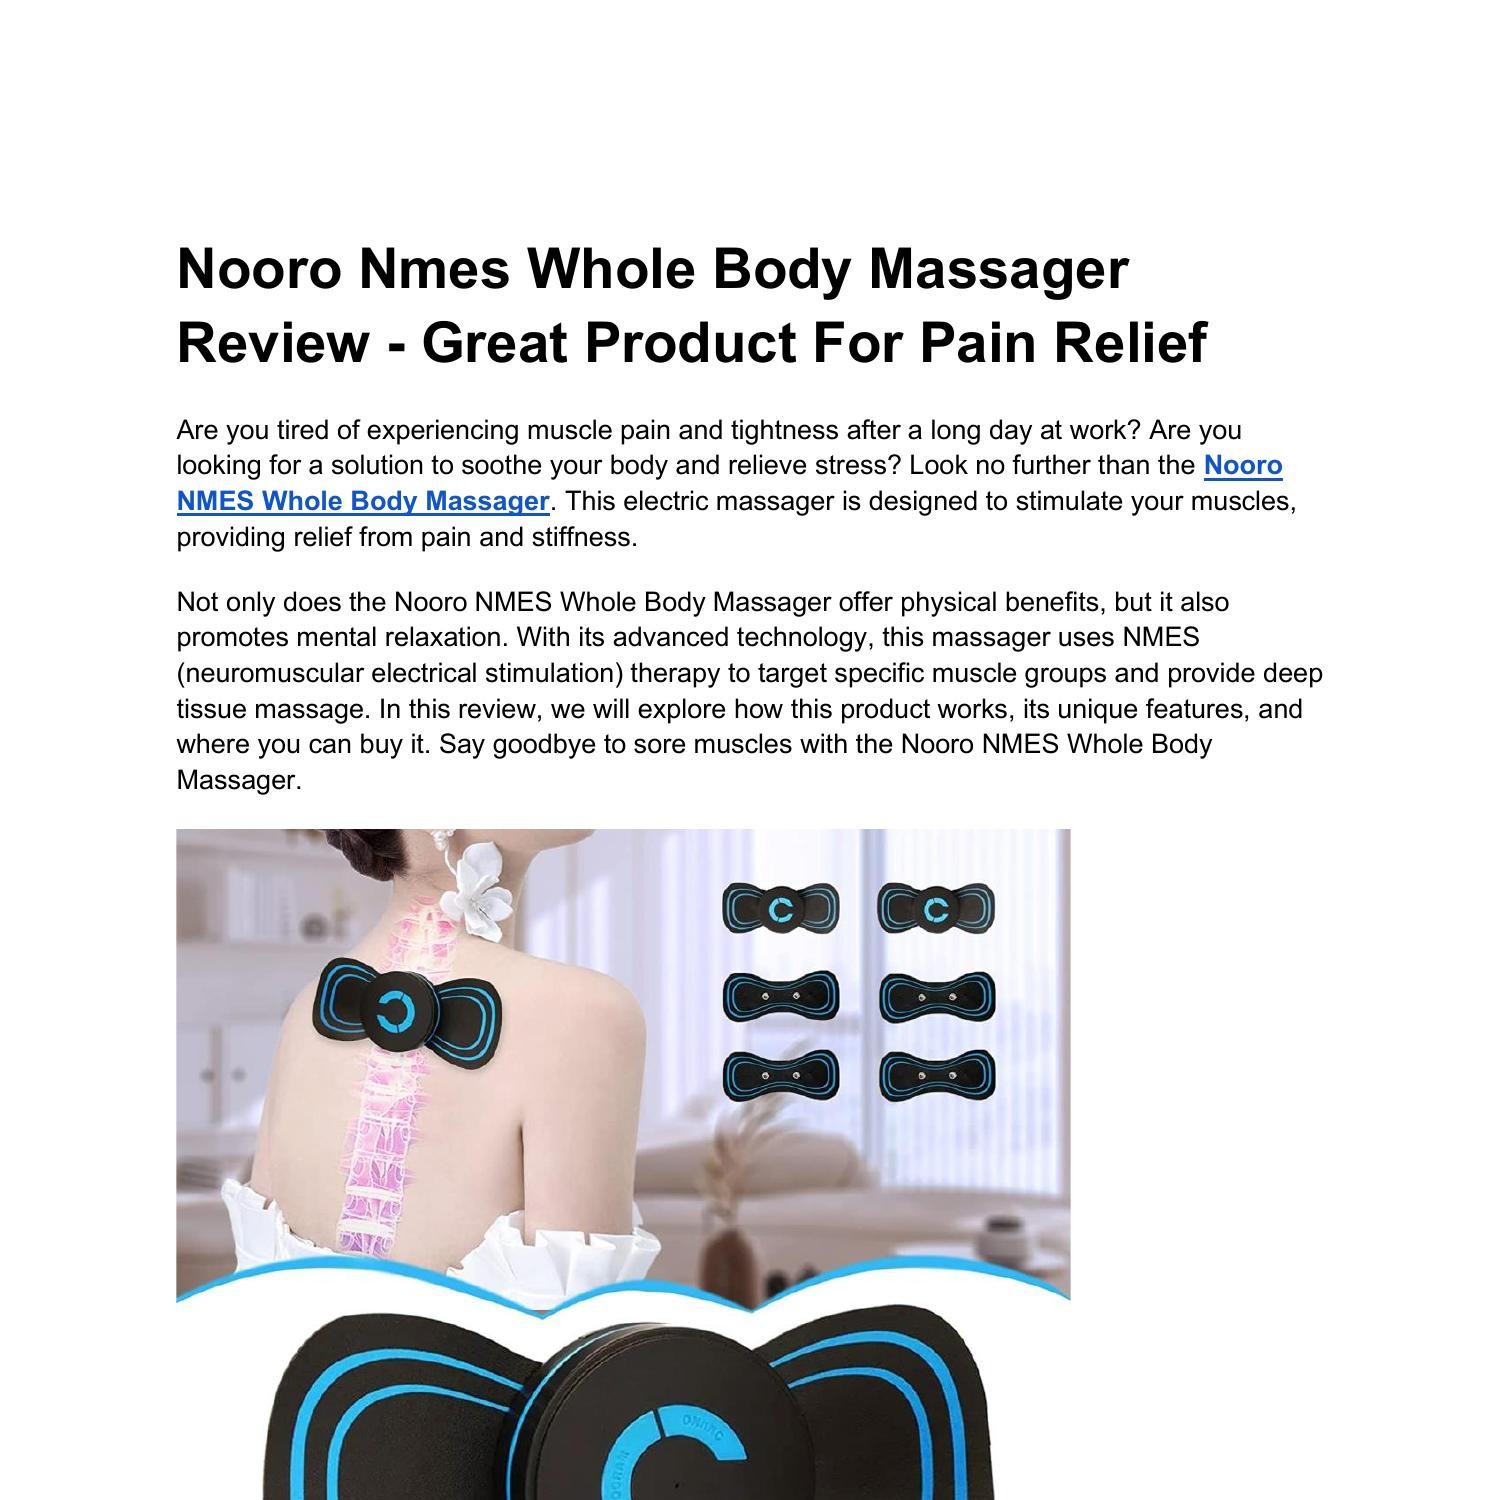 Nooro NMES Whole Body Massager Reviews – Does This Whole Body Massager  Worth Buying? - IPS Inter Press Service Business